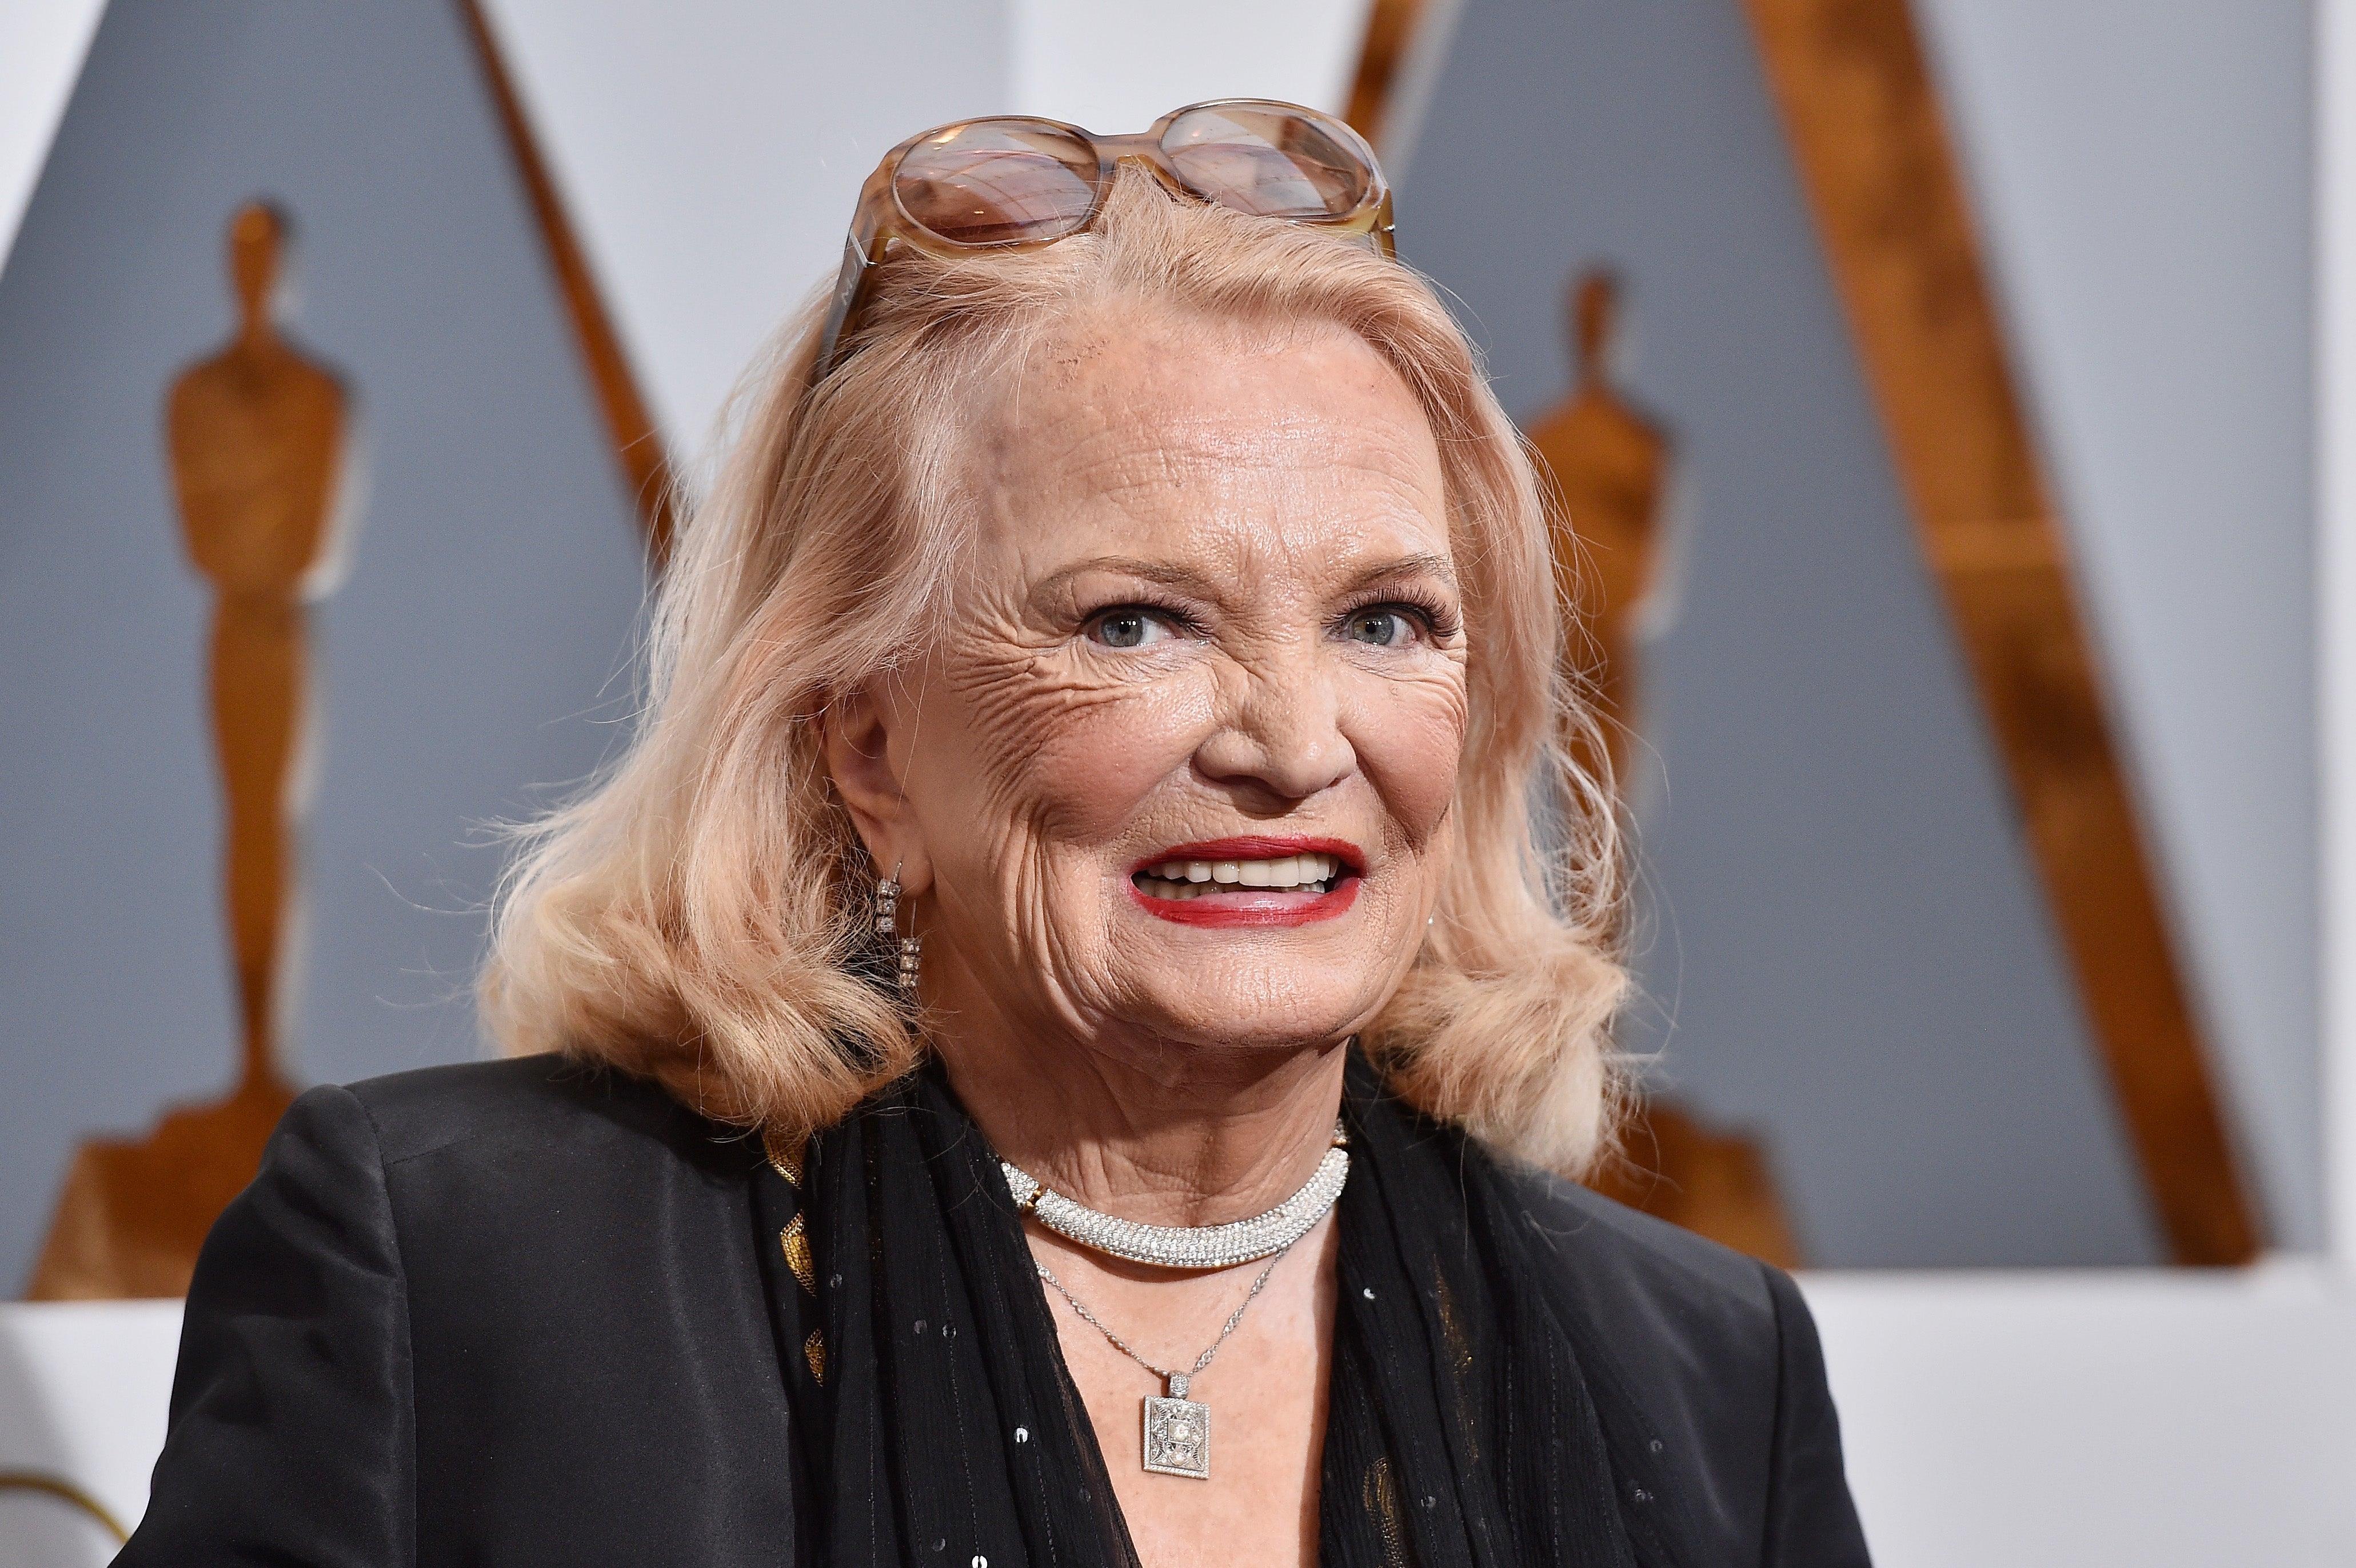 Gena Rowlands played the role of the older version of Allie in 